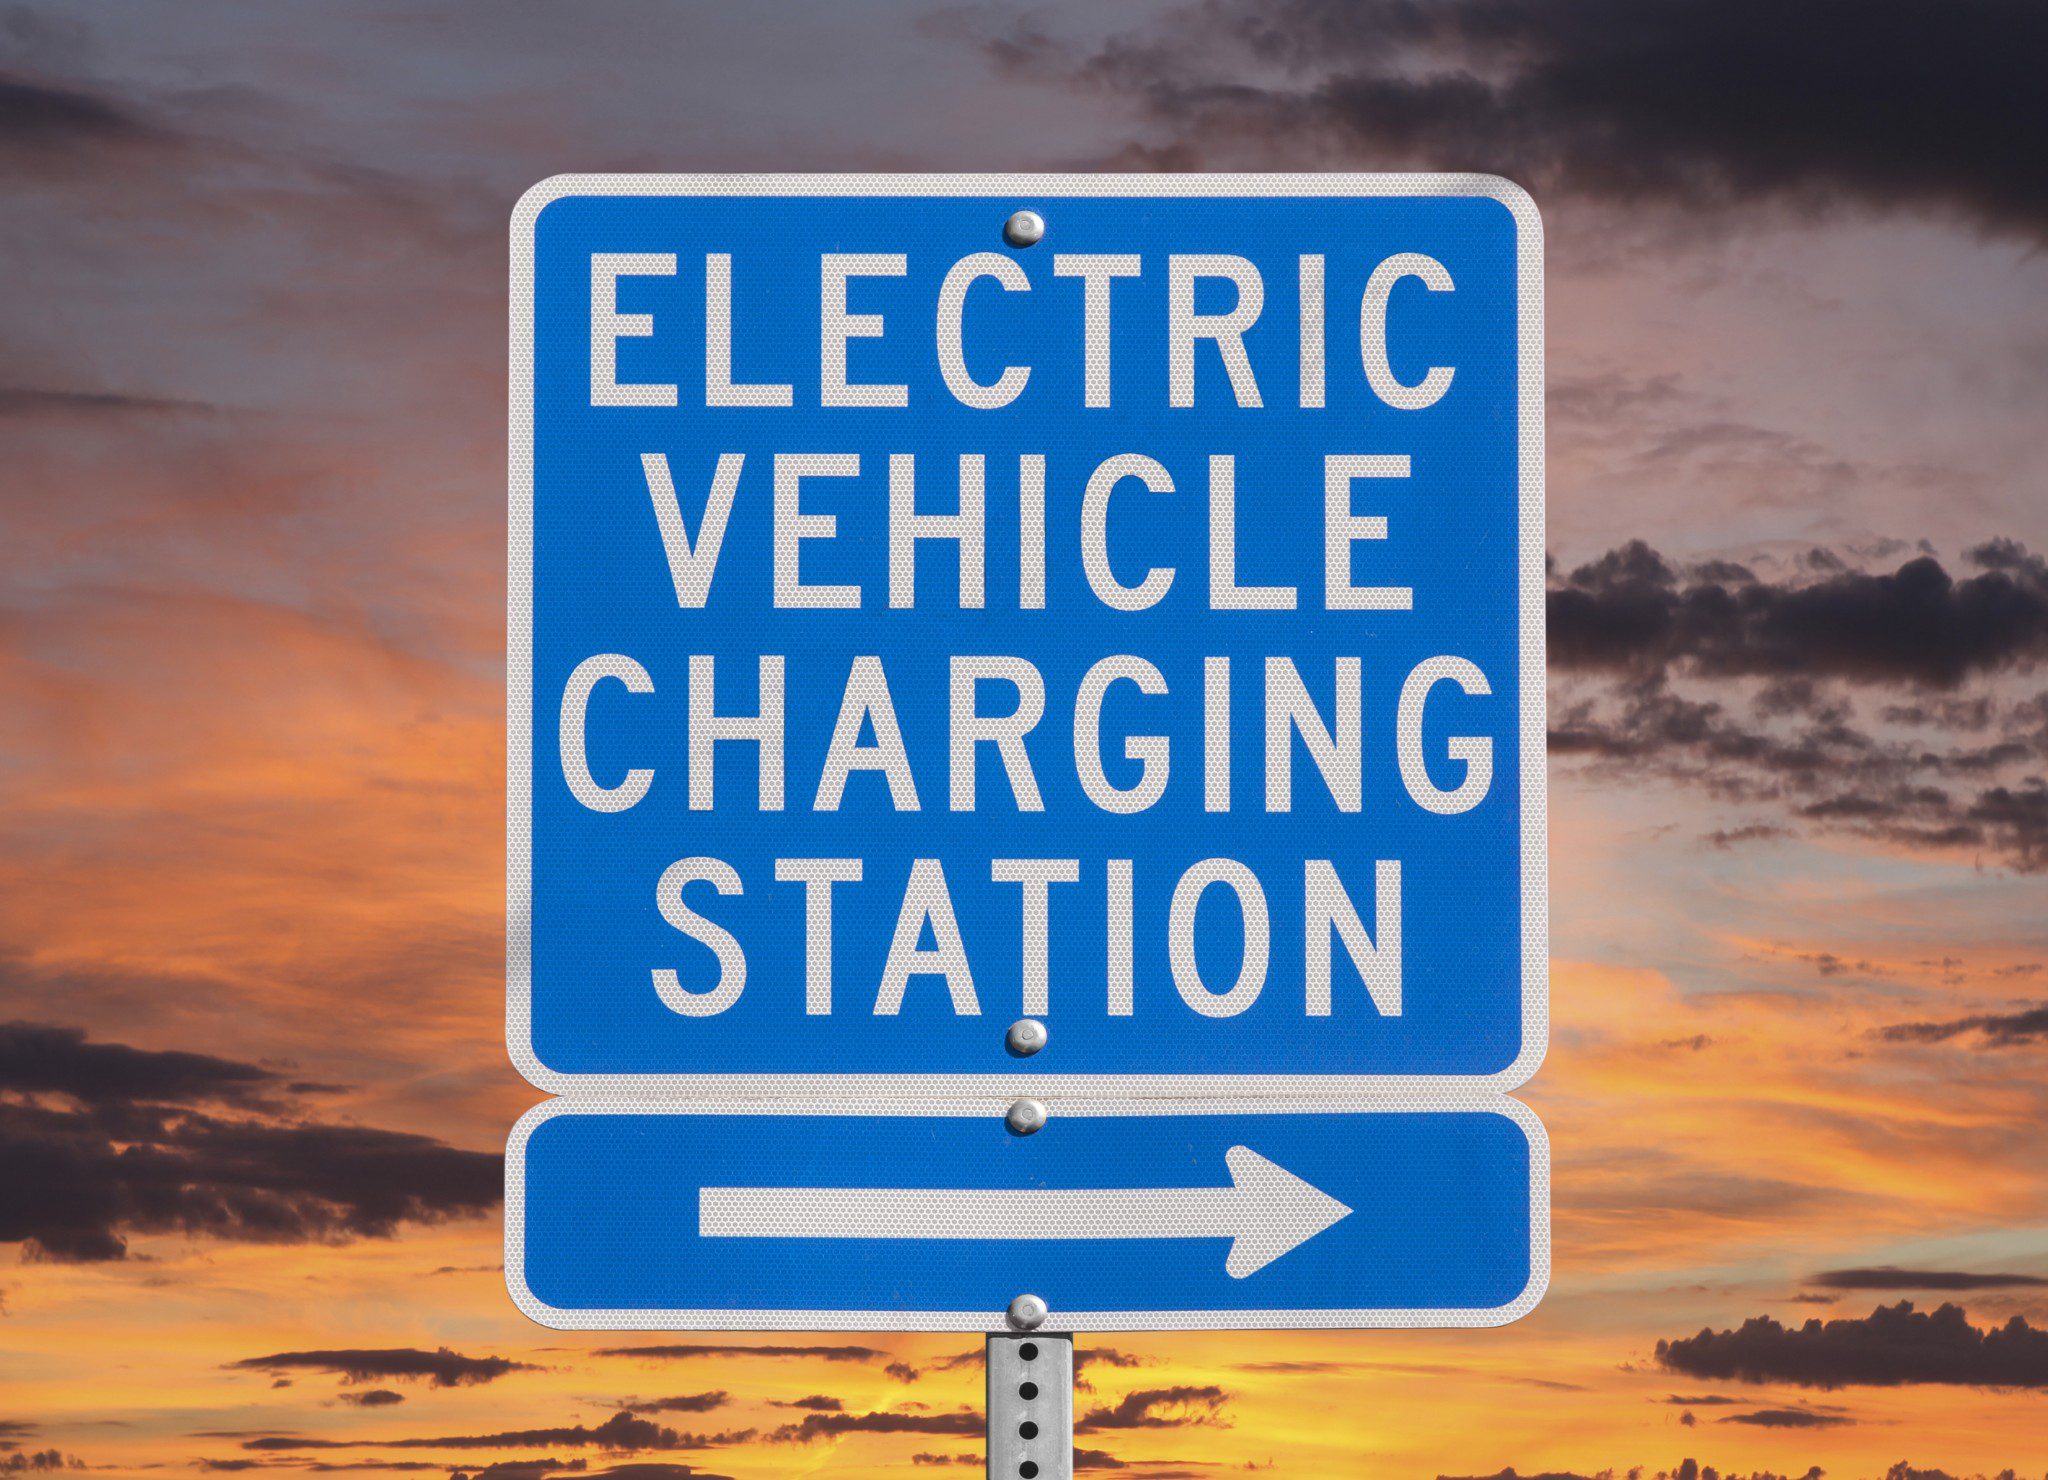 Rogers Services To Install Electric Vehicle Charging Stations In Raleigh